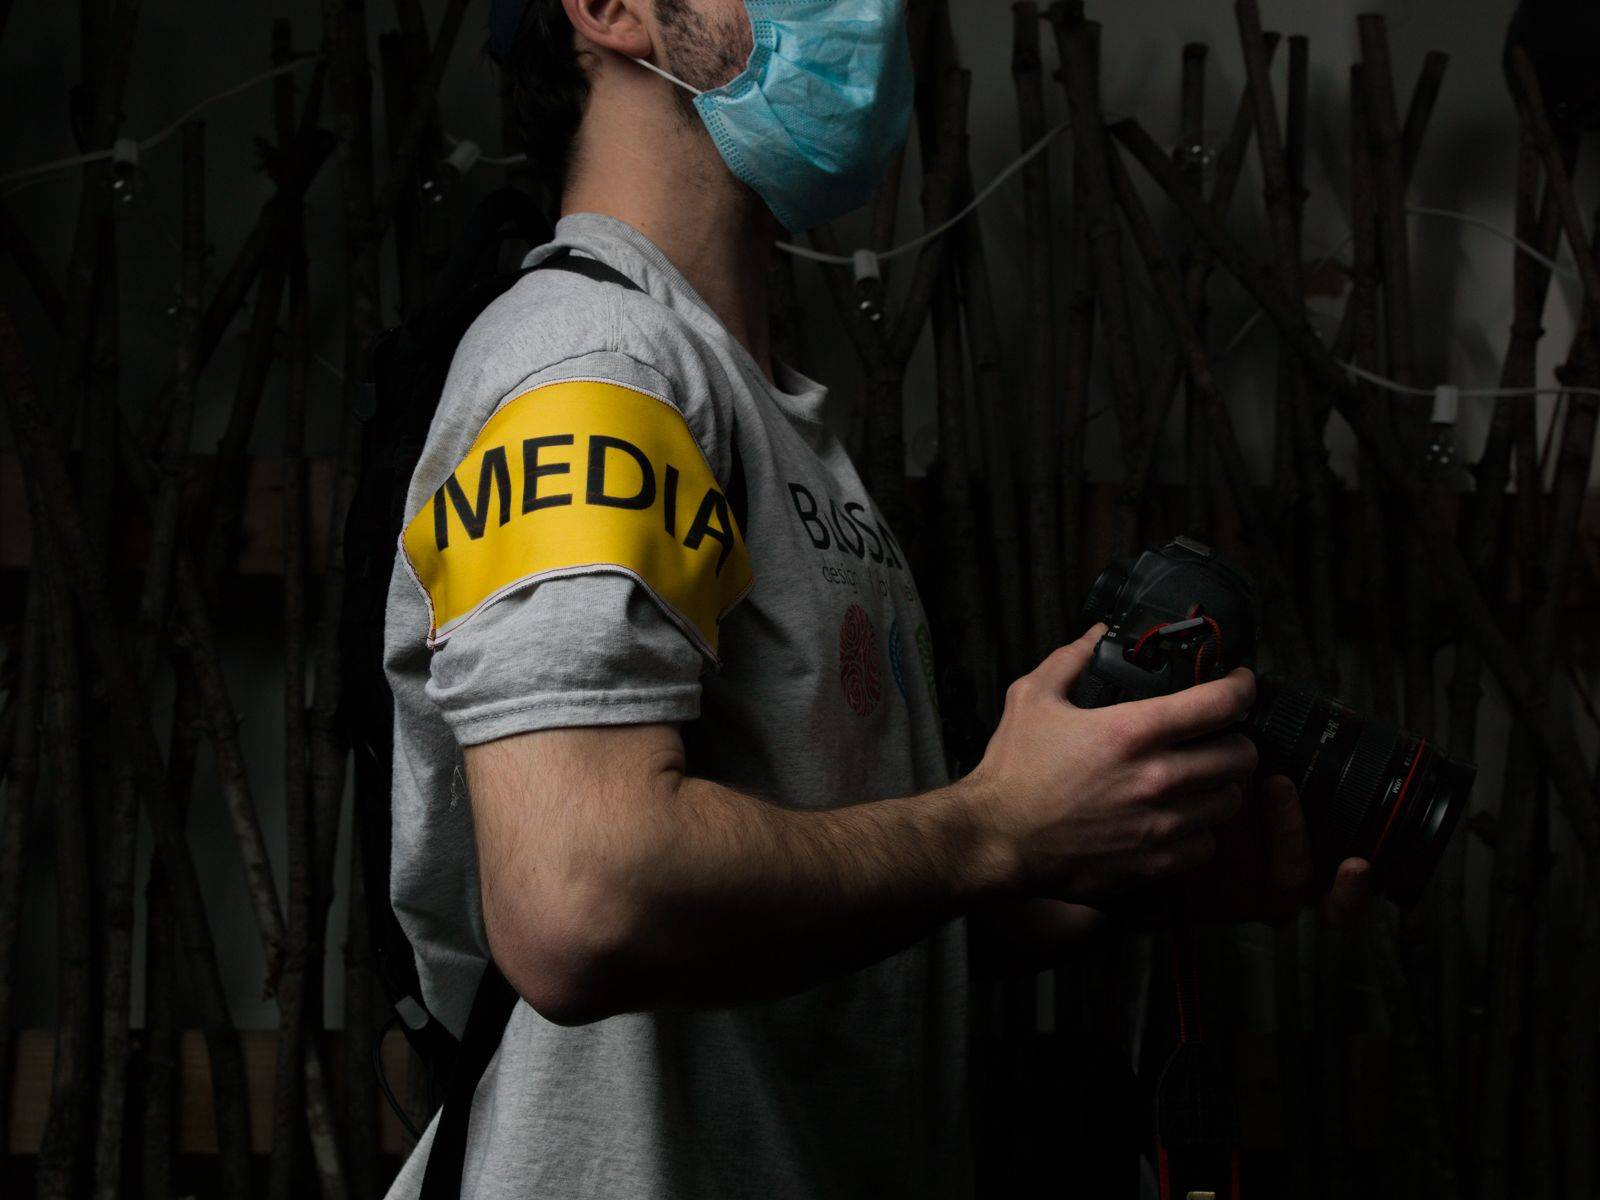 A person wearing a Media Armband